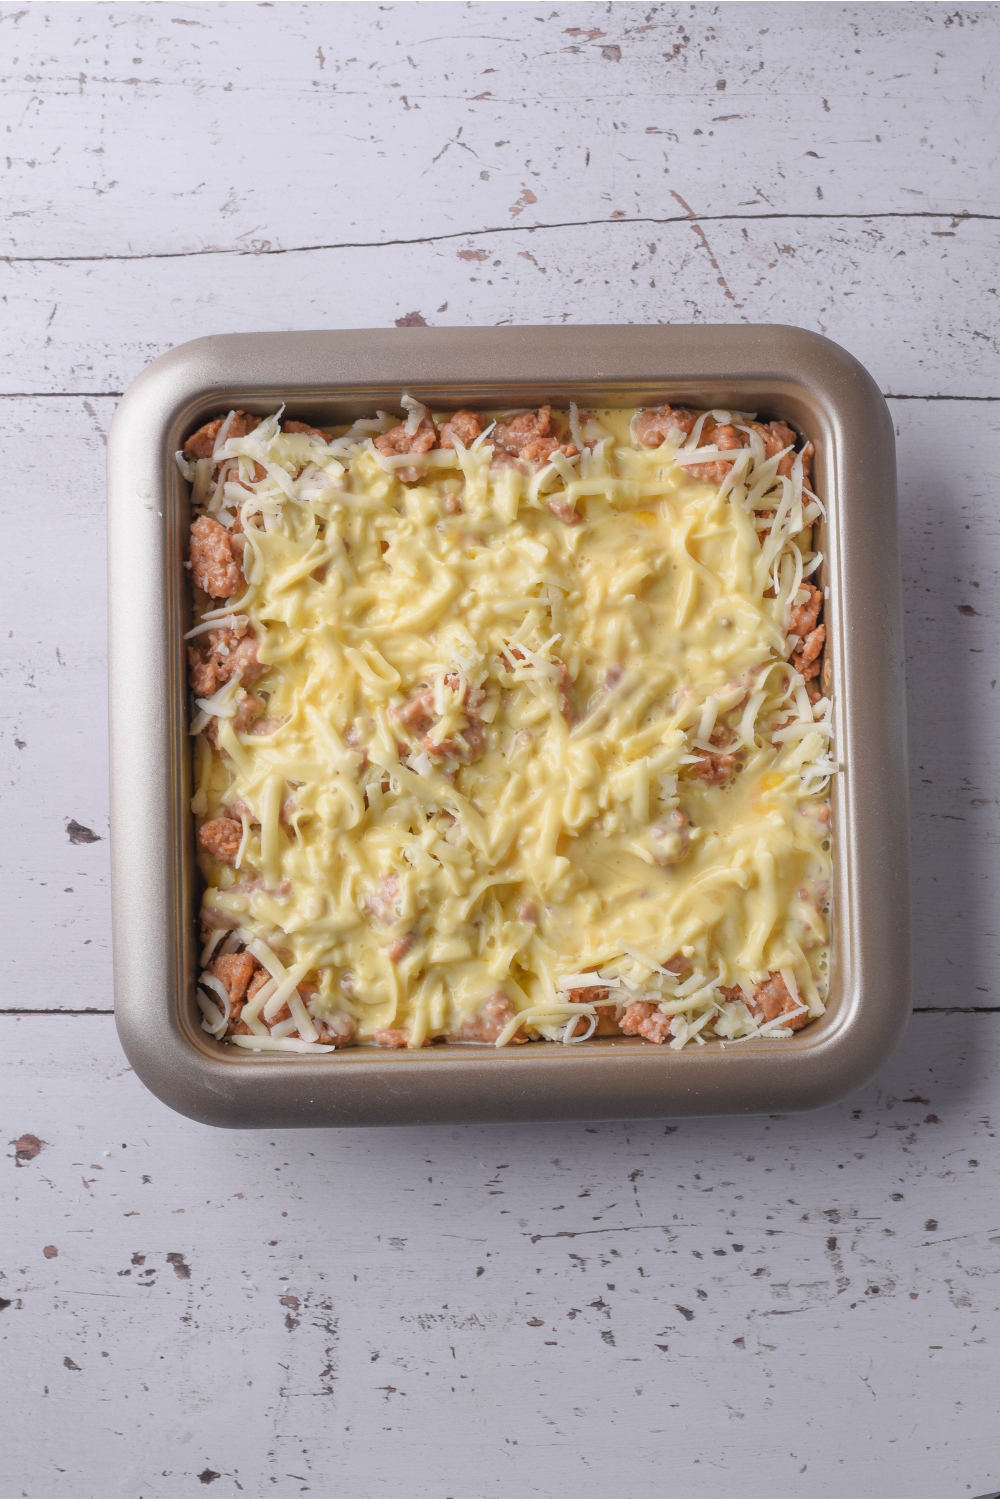 A square baking dish filled with cooked sausage, shredded cheese, and a beaten egg and milk mixture.